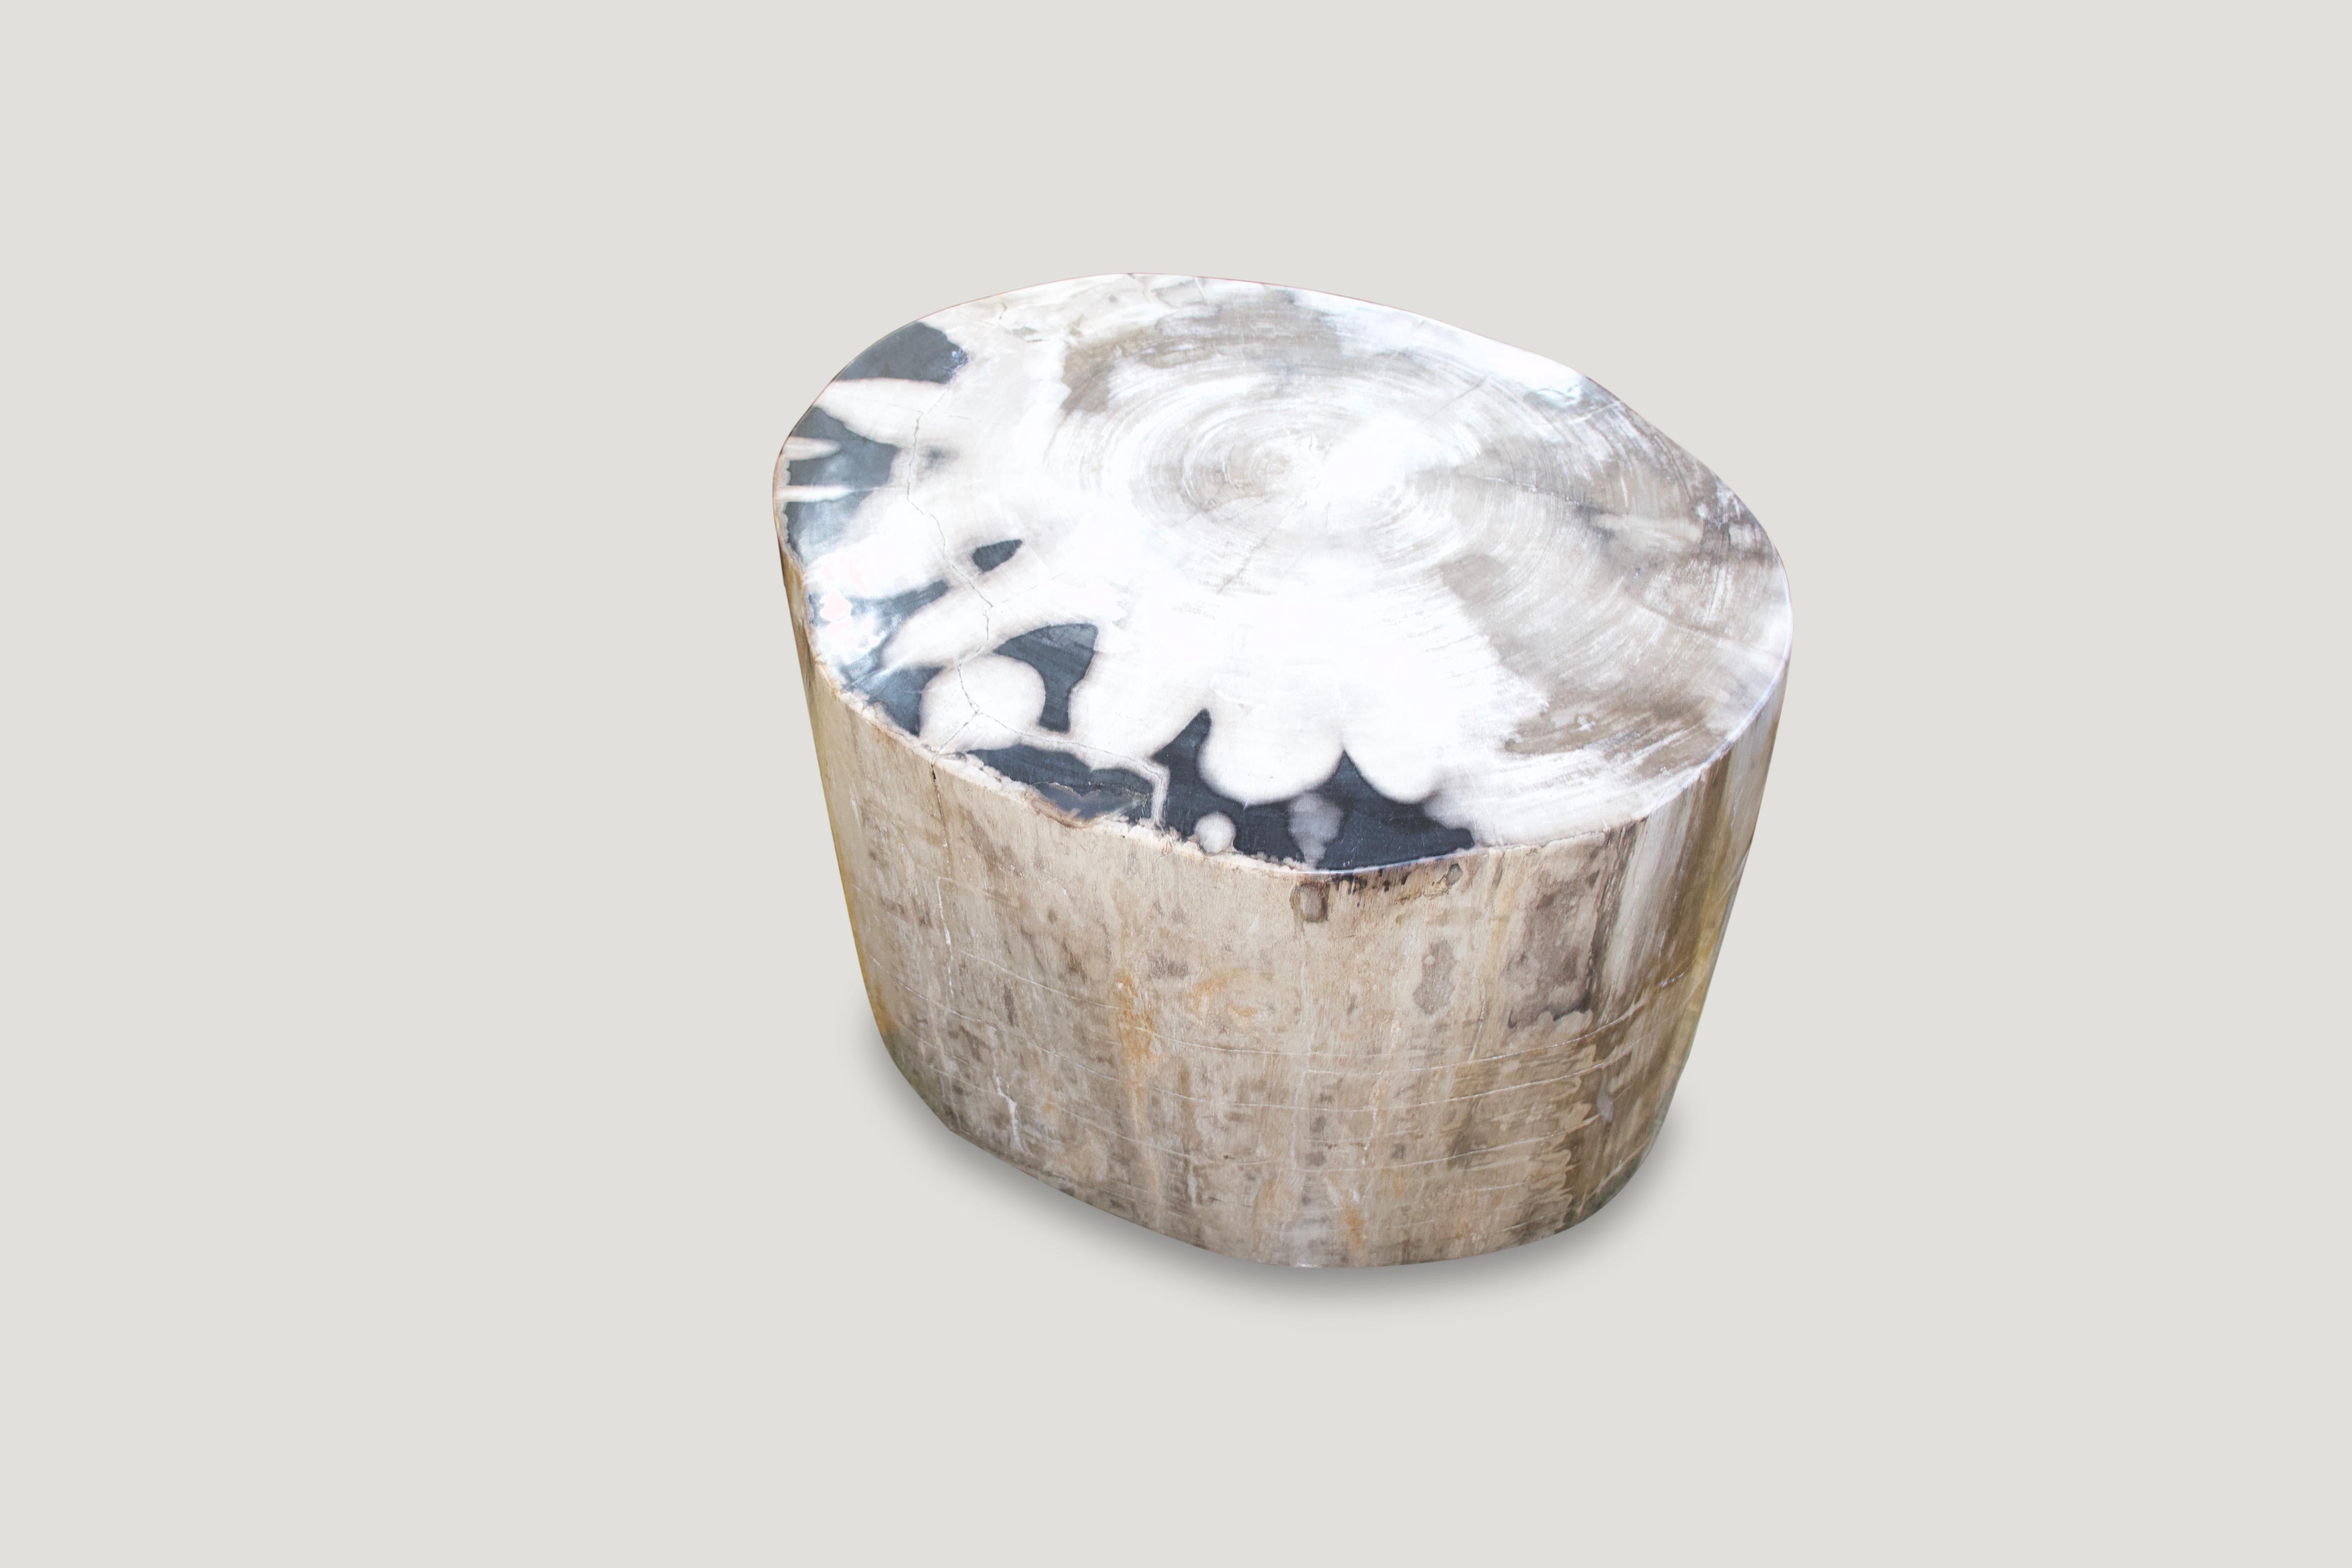 Impressive super smooth petrified wood coffee table or side table in this rare XL size with sensational contrasting tones and natural pattern. We have a pair cut from the same log. The price and size represents the images shown of one.

We source